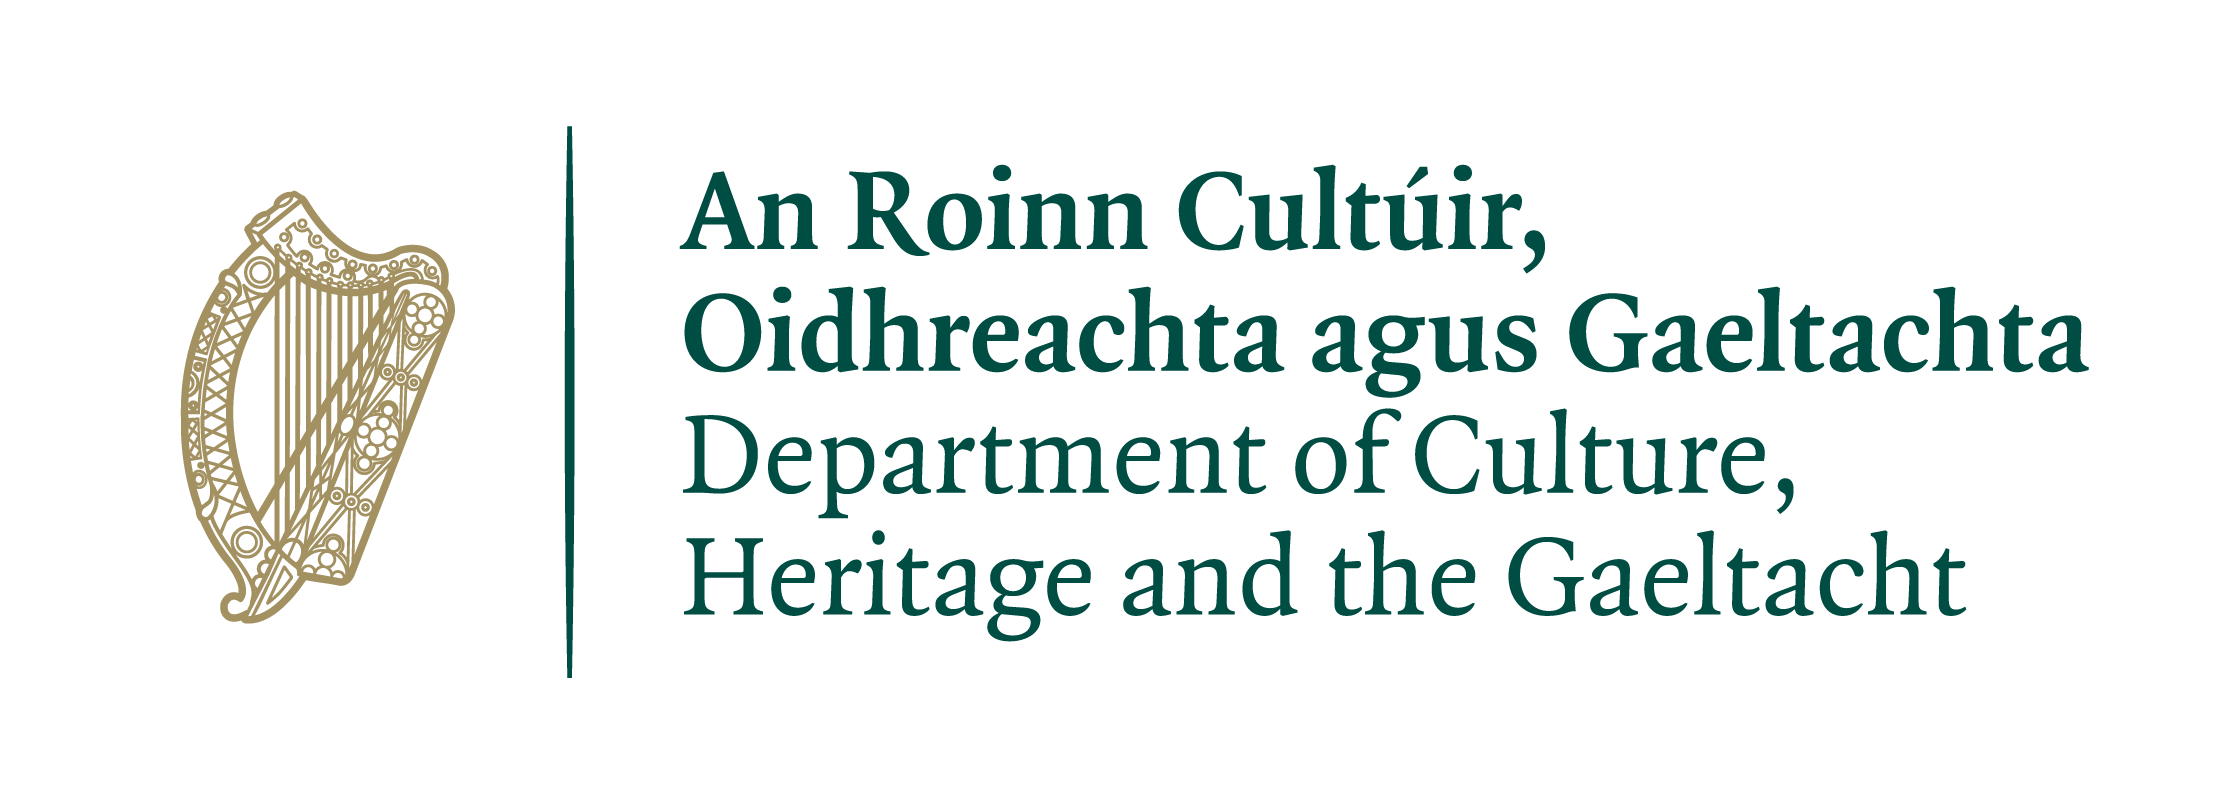 Logo of the Department of Culture, Heritage and the Gaeltacht